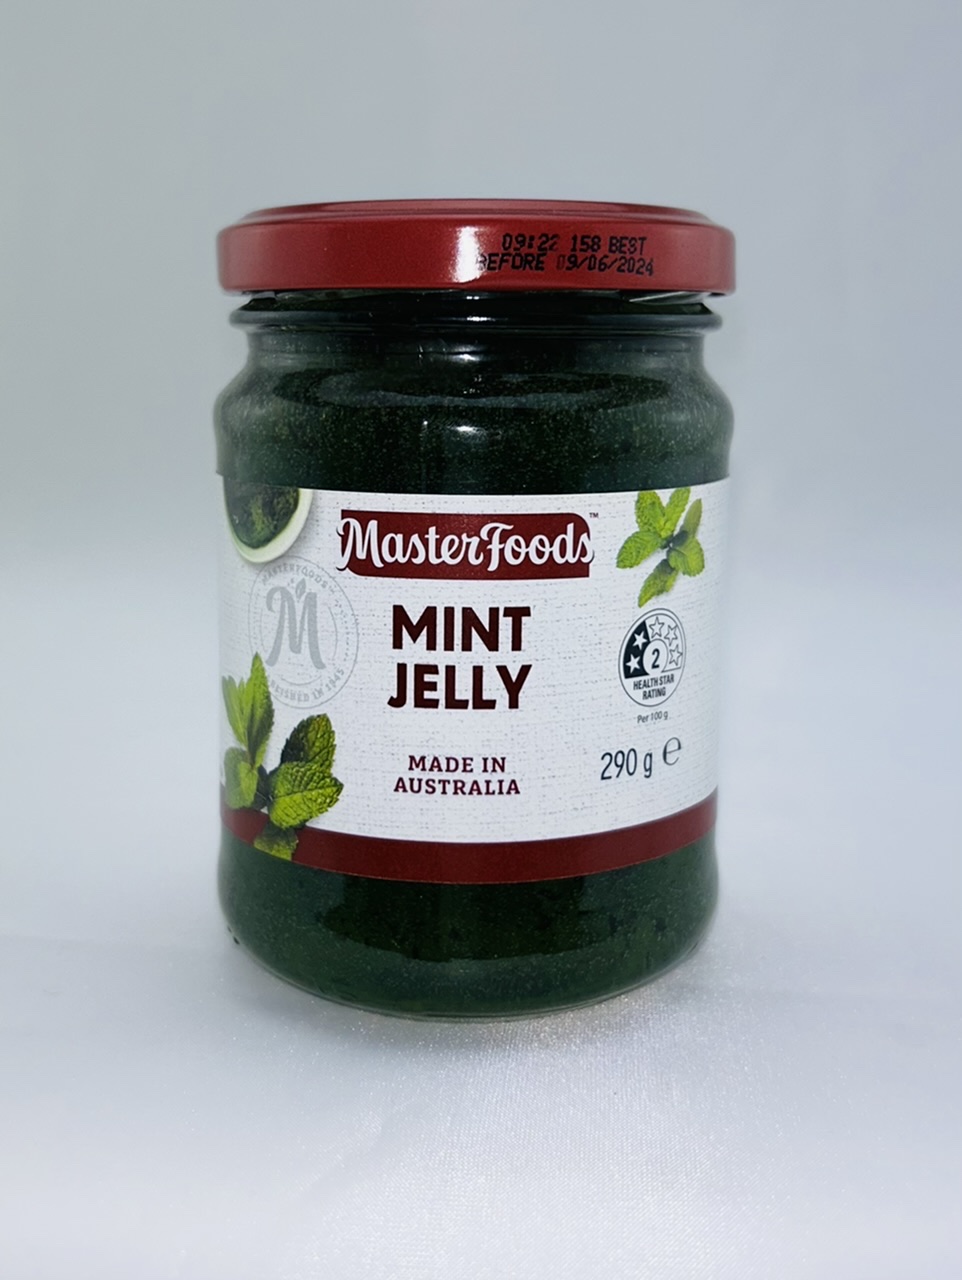 Mint Jelly 290g Masterfoods - DMC Meat & Seafood